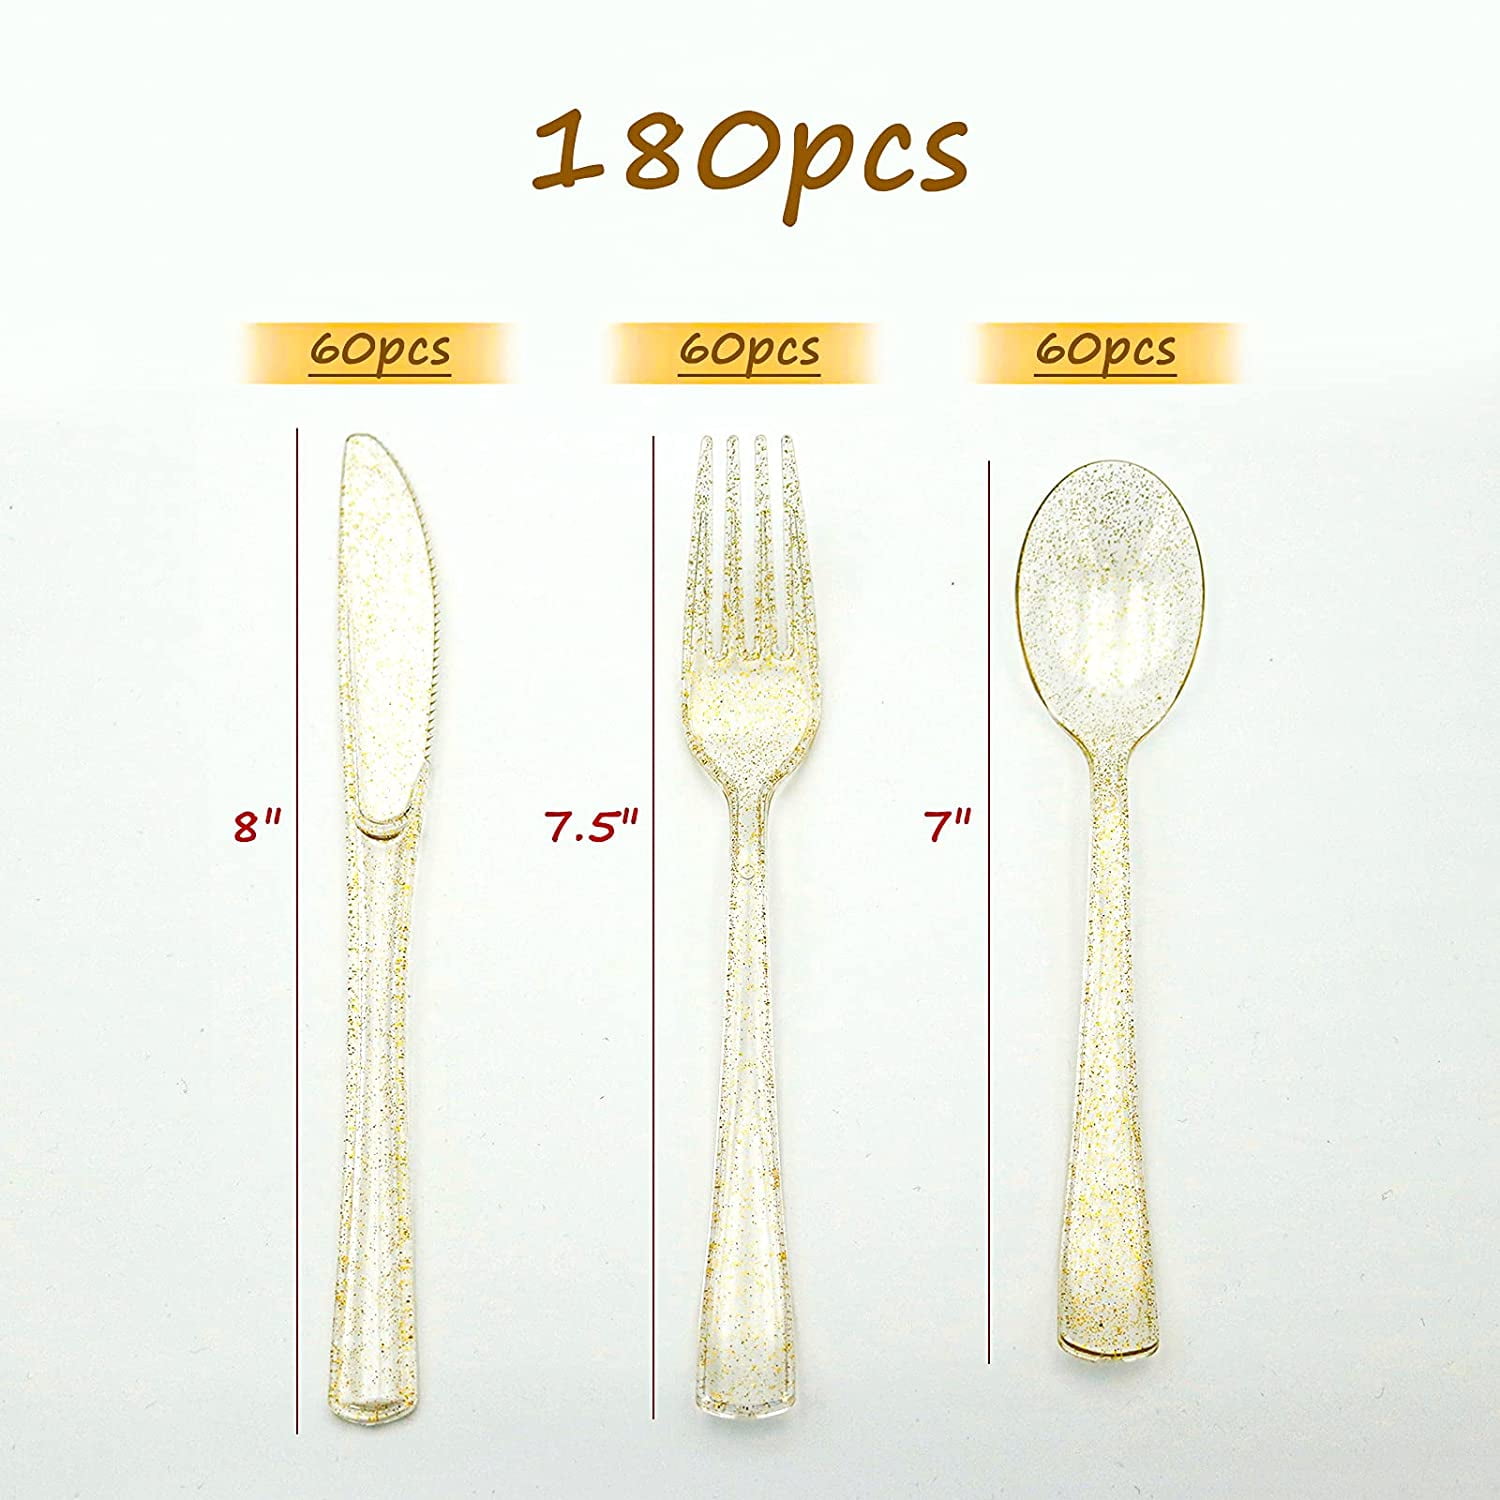 60 Gold Forks 60 Gold Spoons 60 Gold Knives Disposable Glitter Gold Cutlery Flatware Set Fancy Party Utensils hapray 180PCS Rose Gold Plastic Silverware Set 